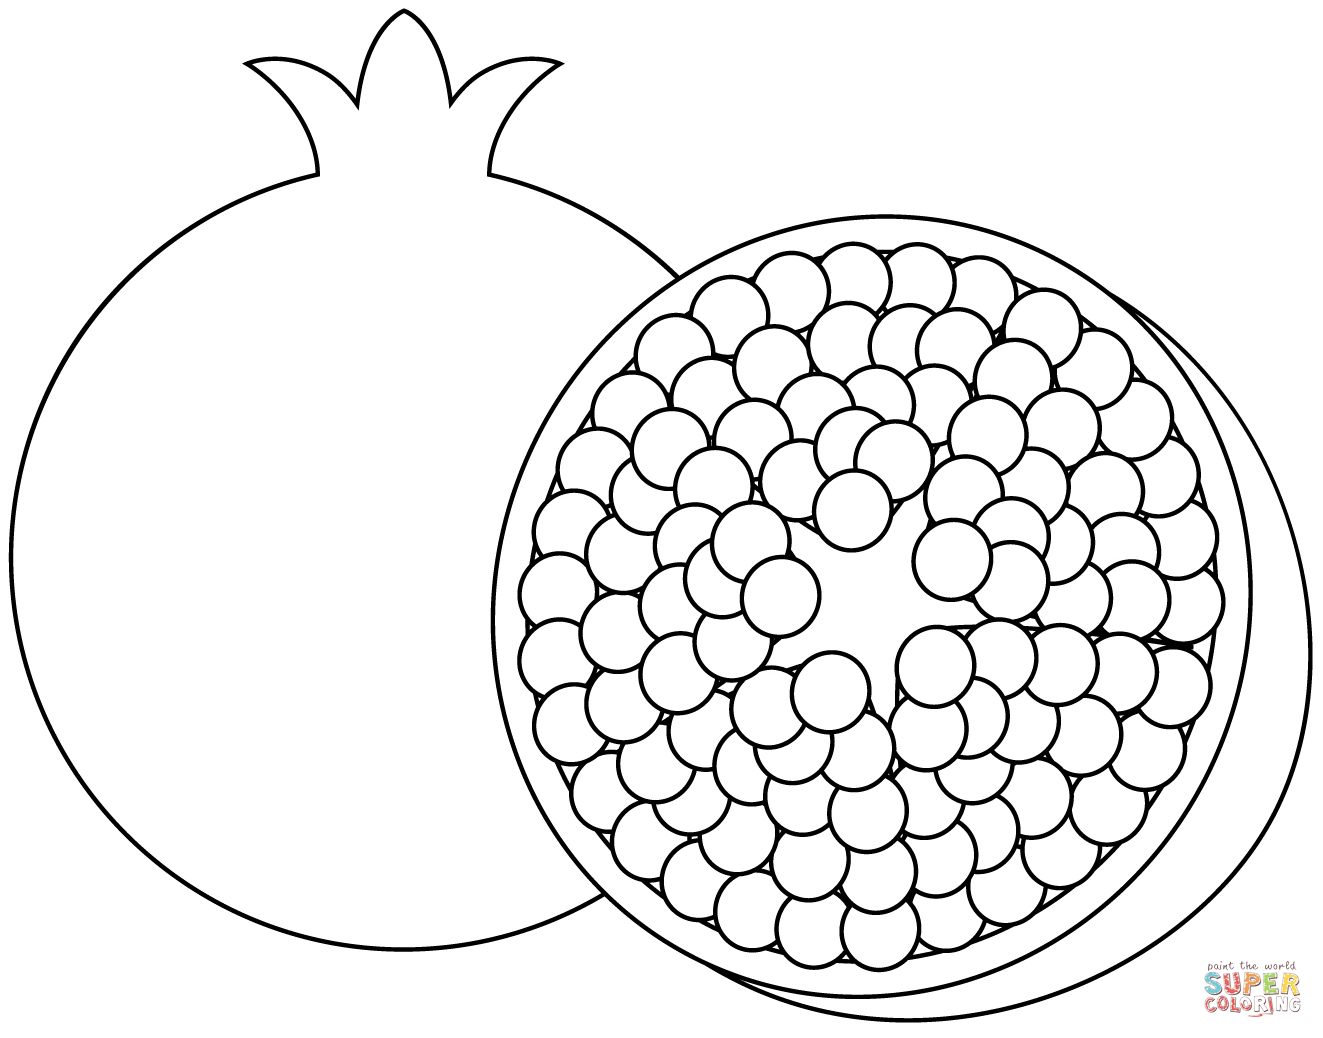 Pomegranate coloring page free printable coloring pages